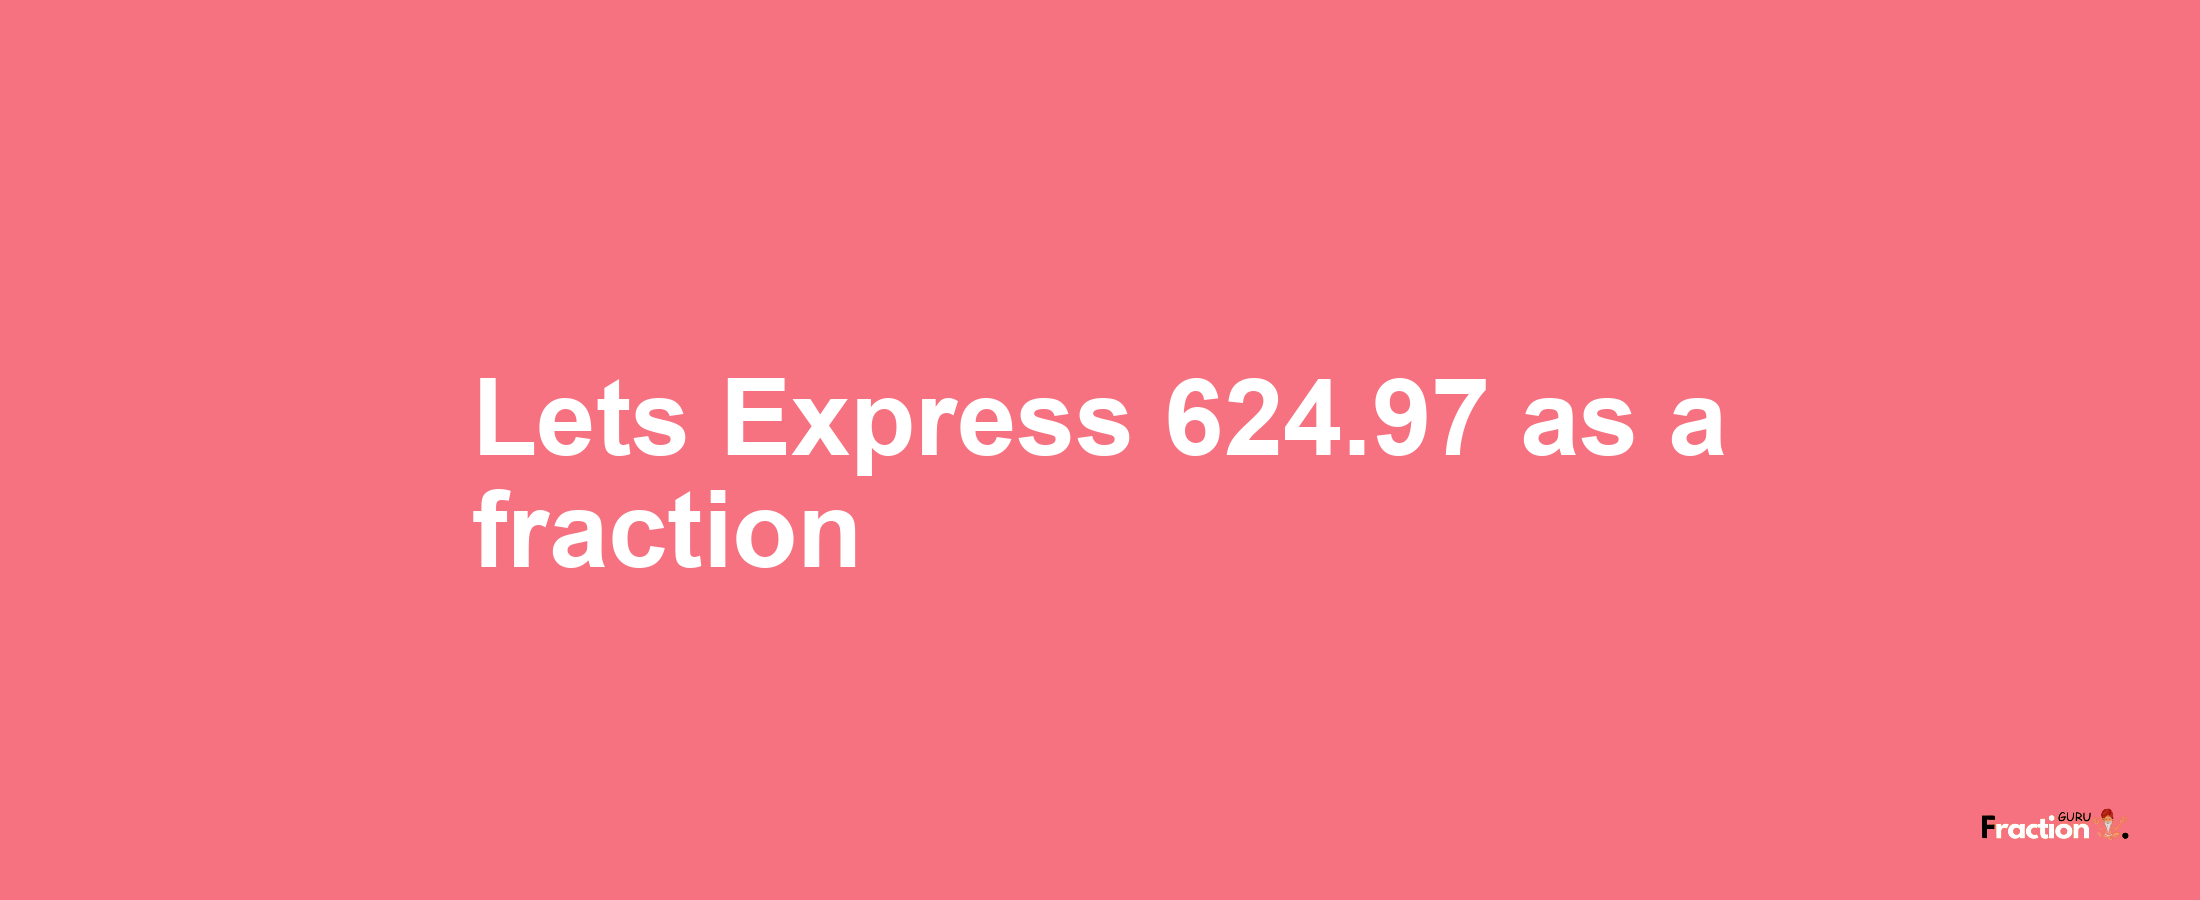 Lets Express 624.97 as afraction